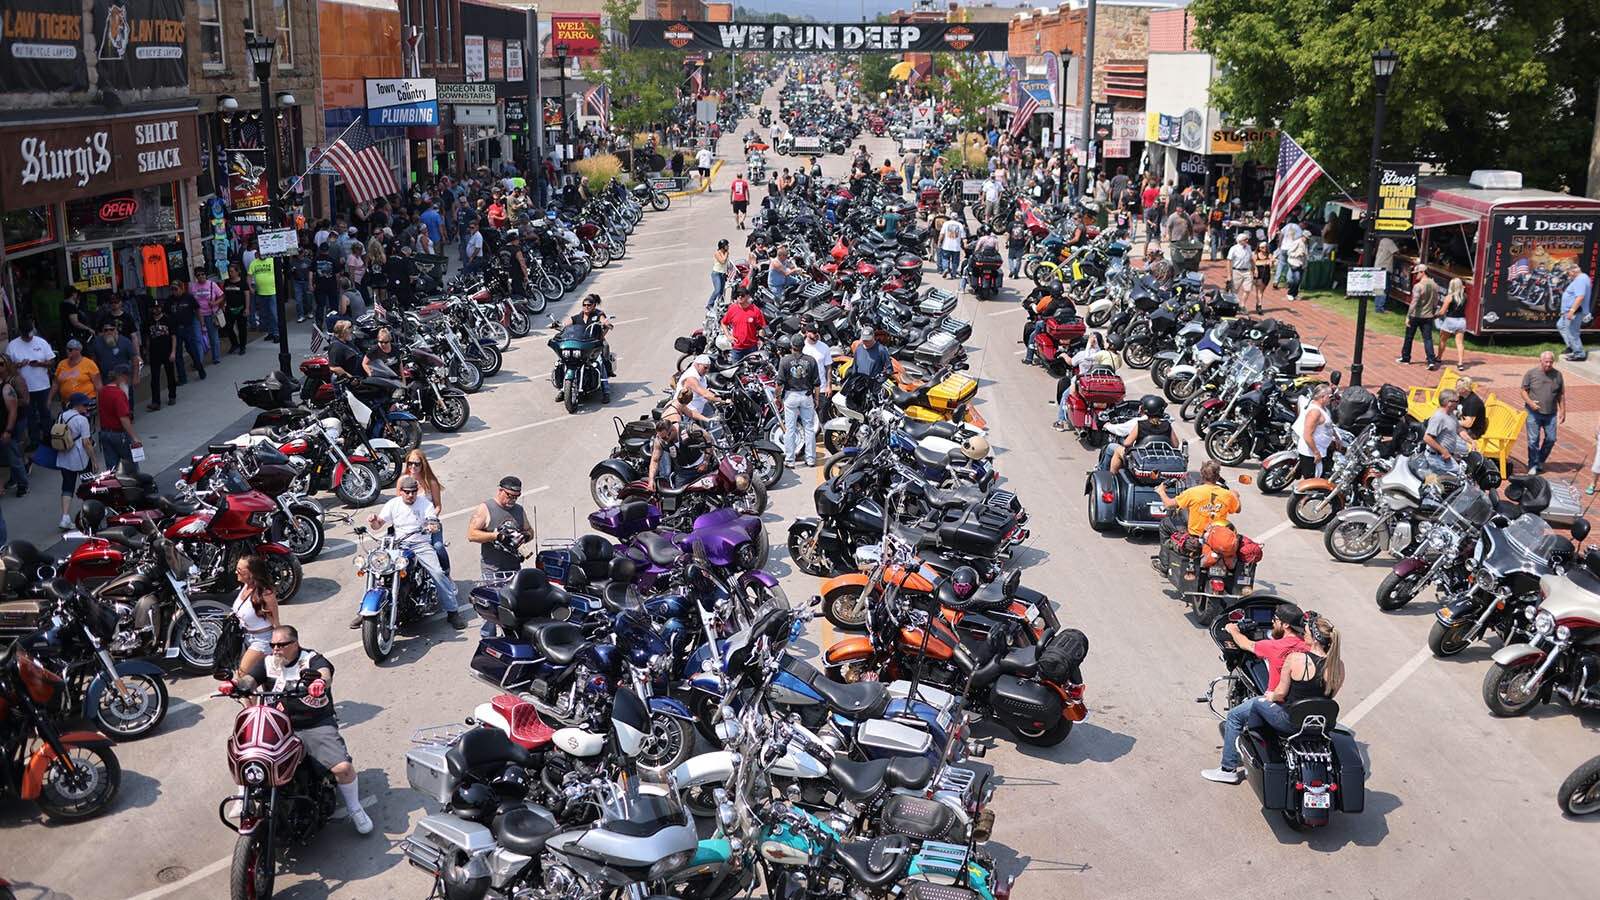 Thousands of motorcycles line the main drag through Sturgis.